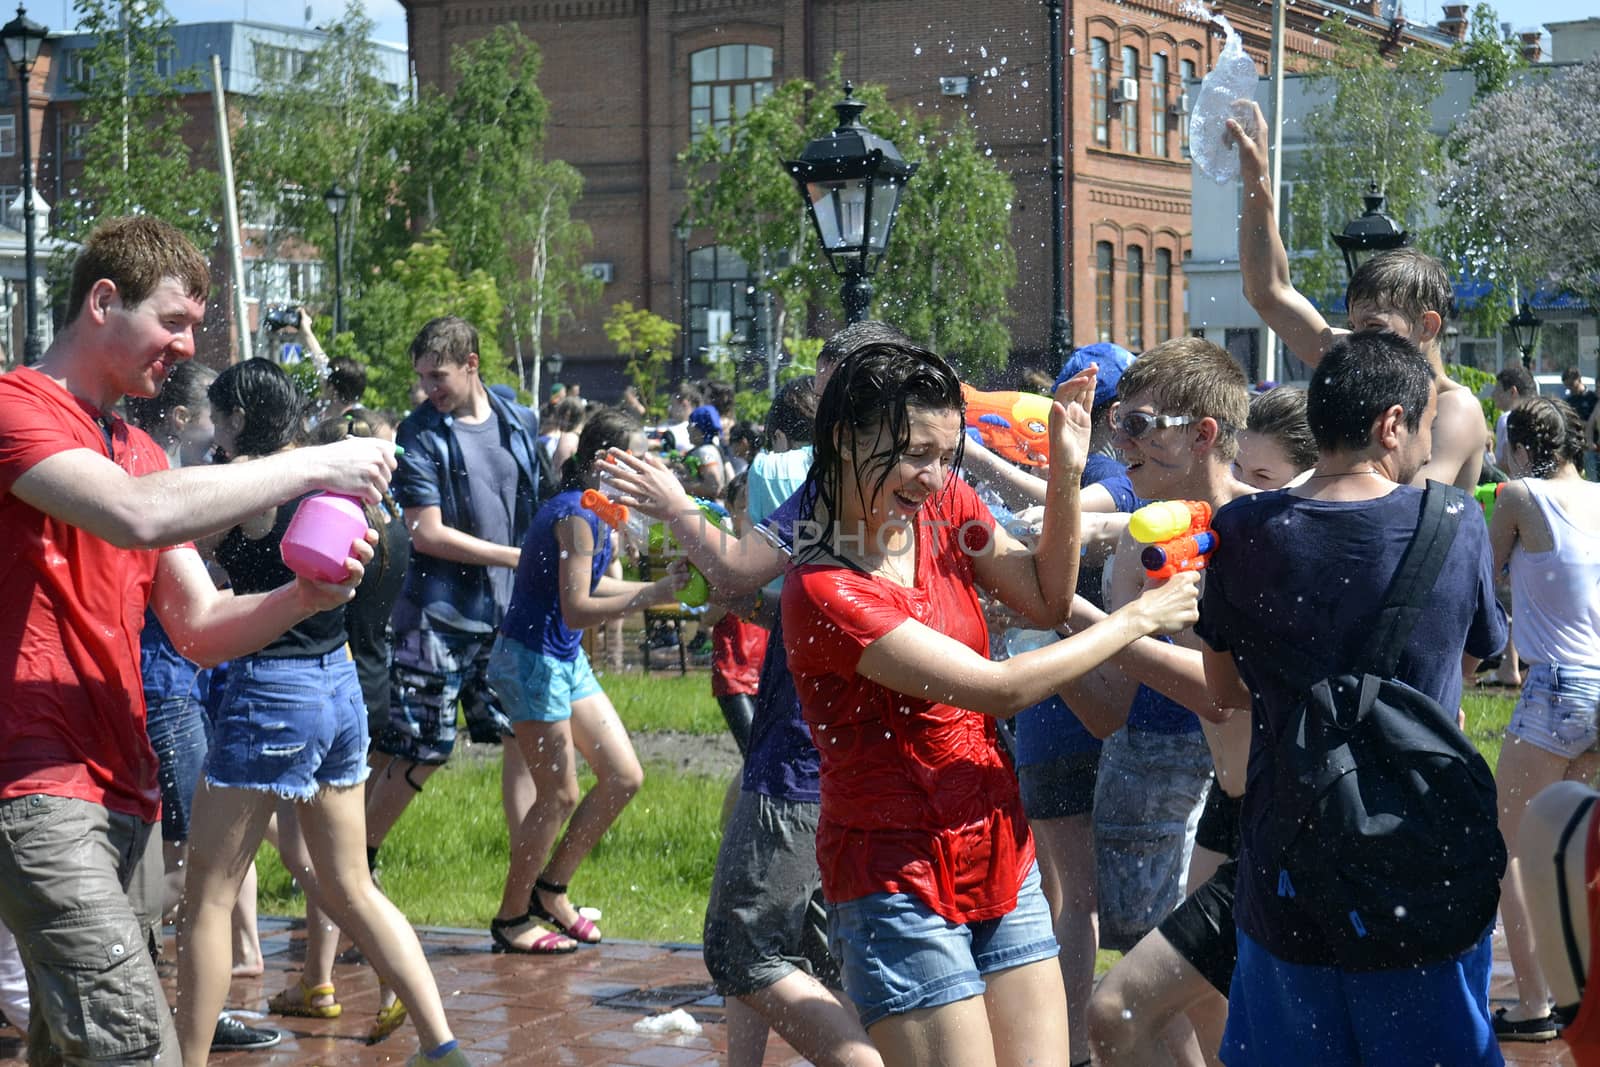 The game "Water Fight" in honor of opening of a summer season on by veronka72